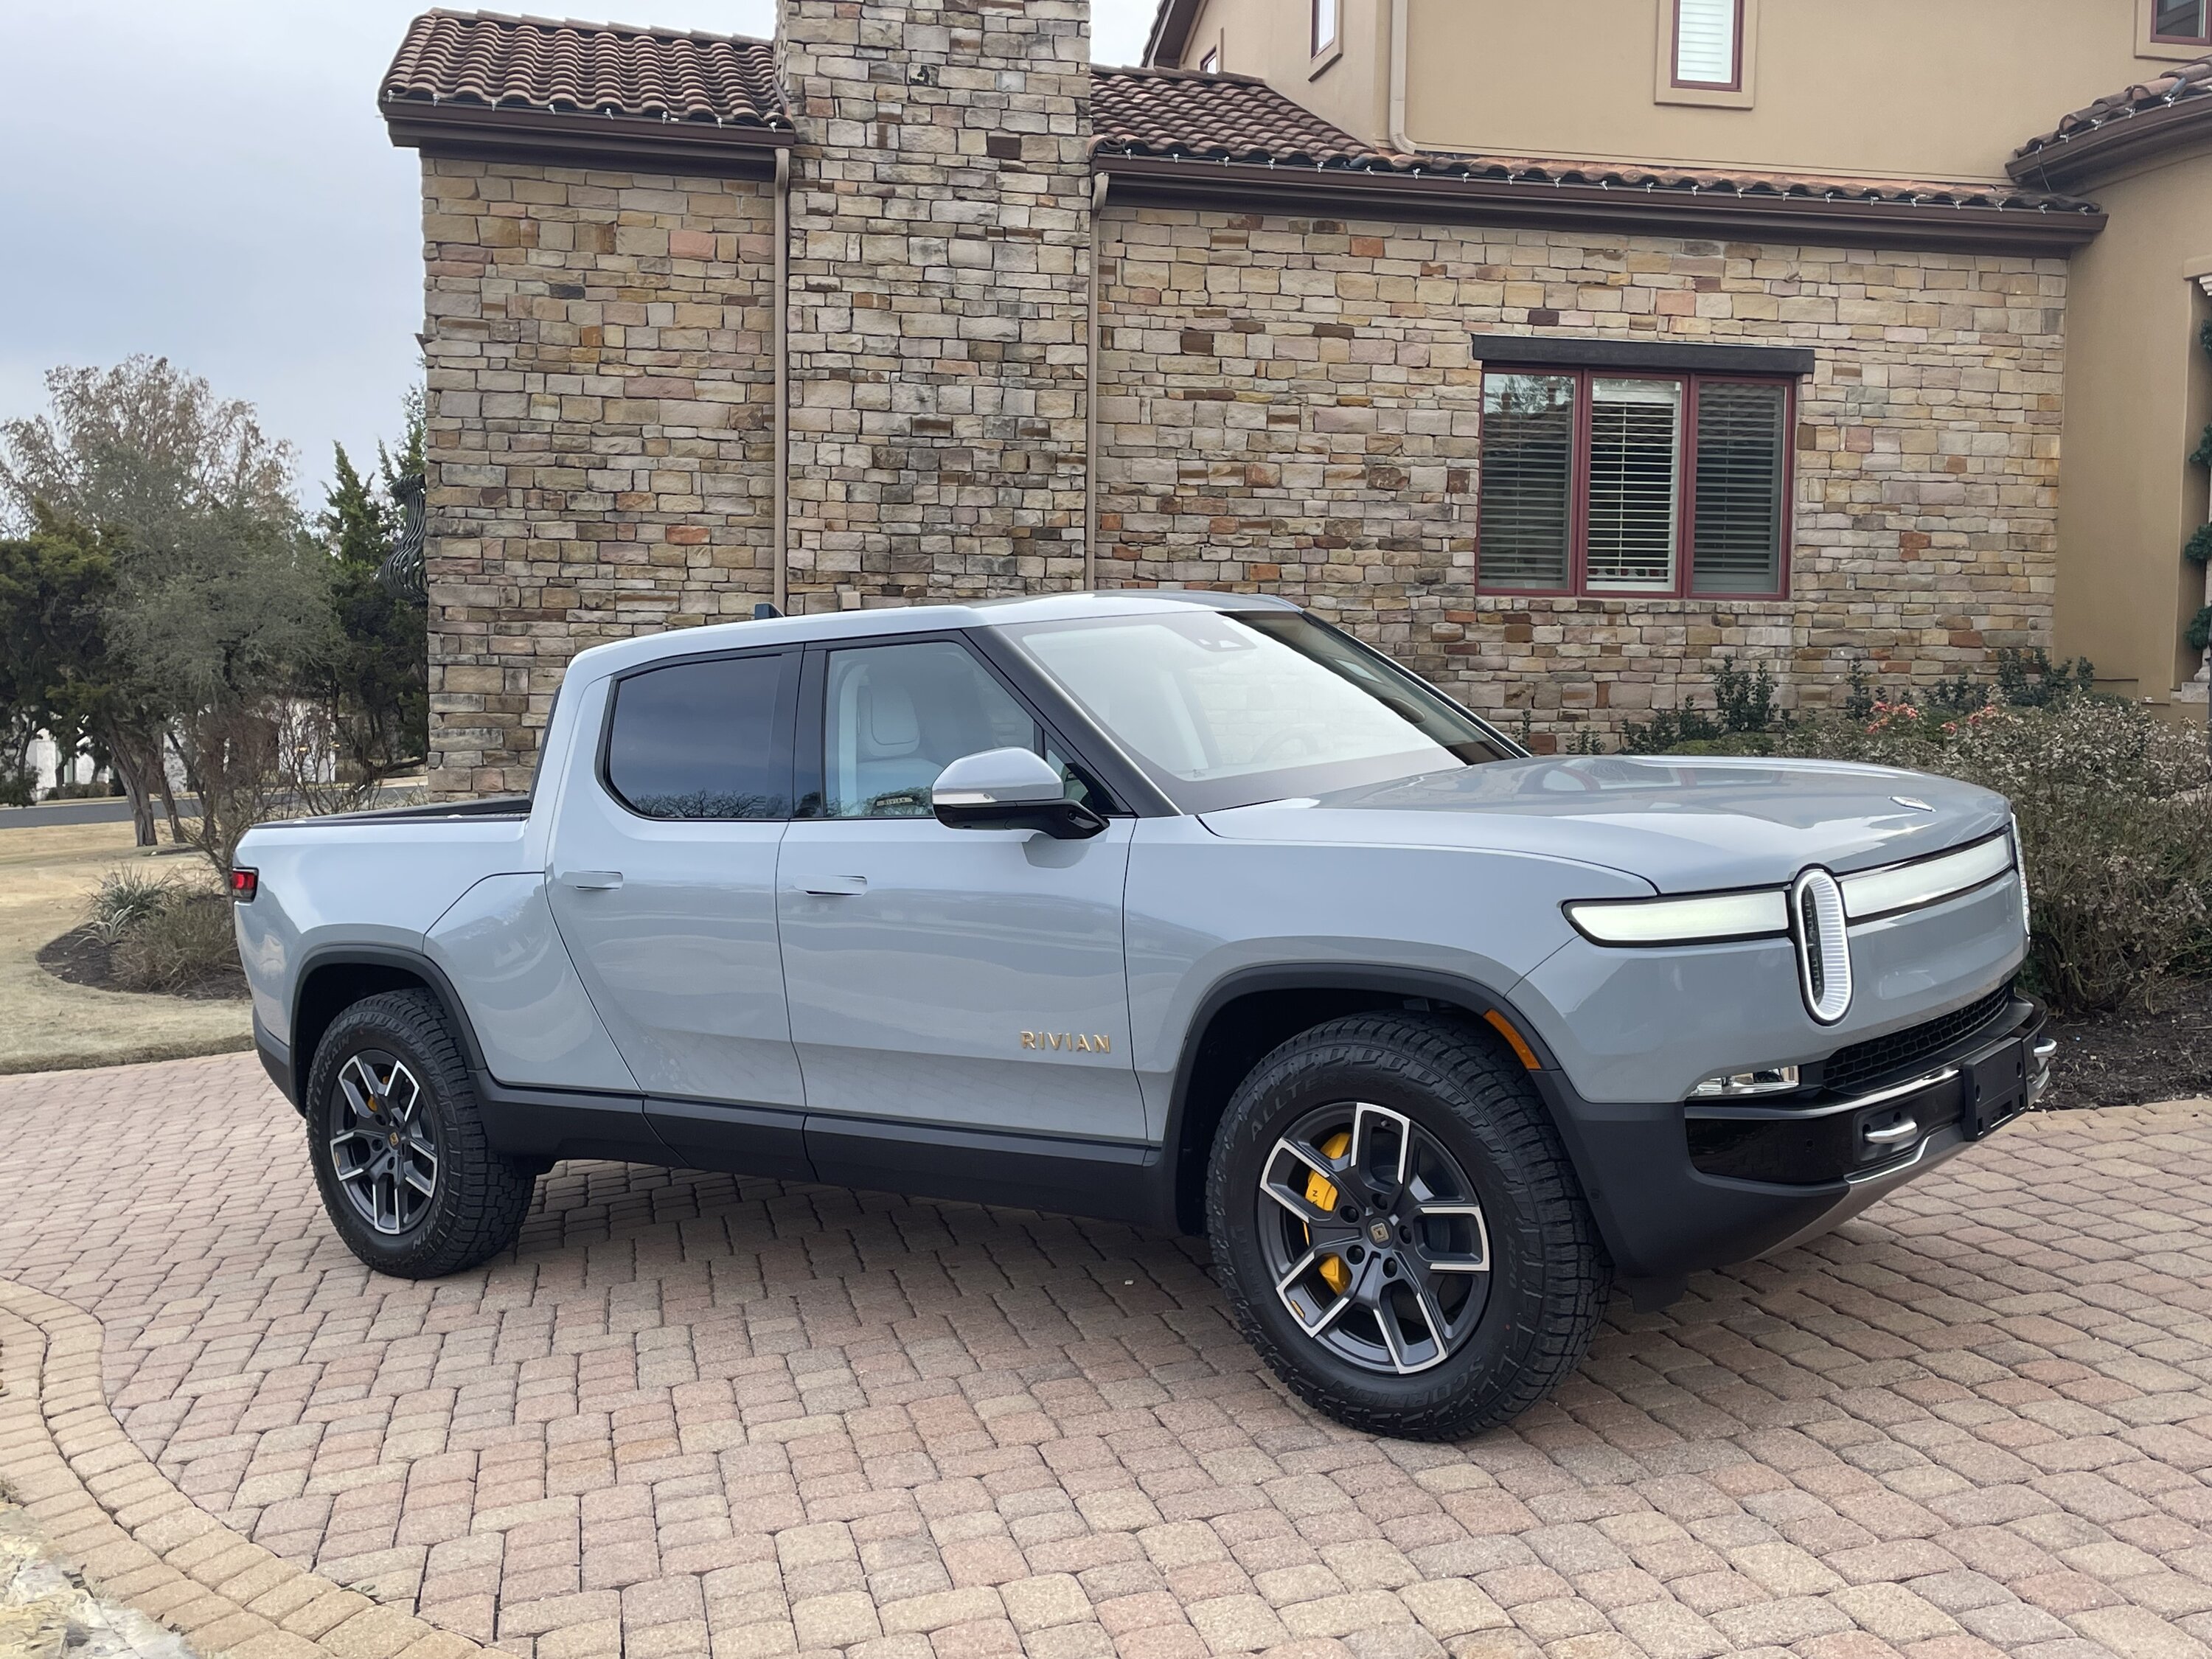 Rivian R1T R1S 【BestEvMod】Let’s Do a Giveaway Raffle! End on 8/29 IMG_3148